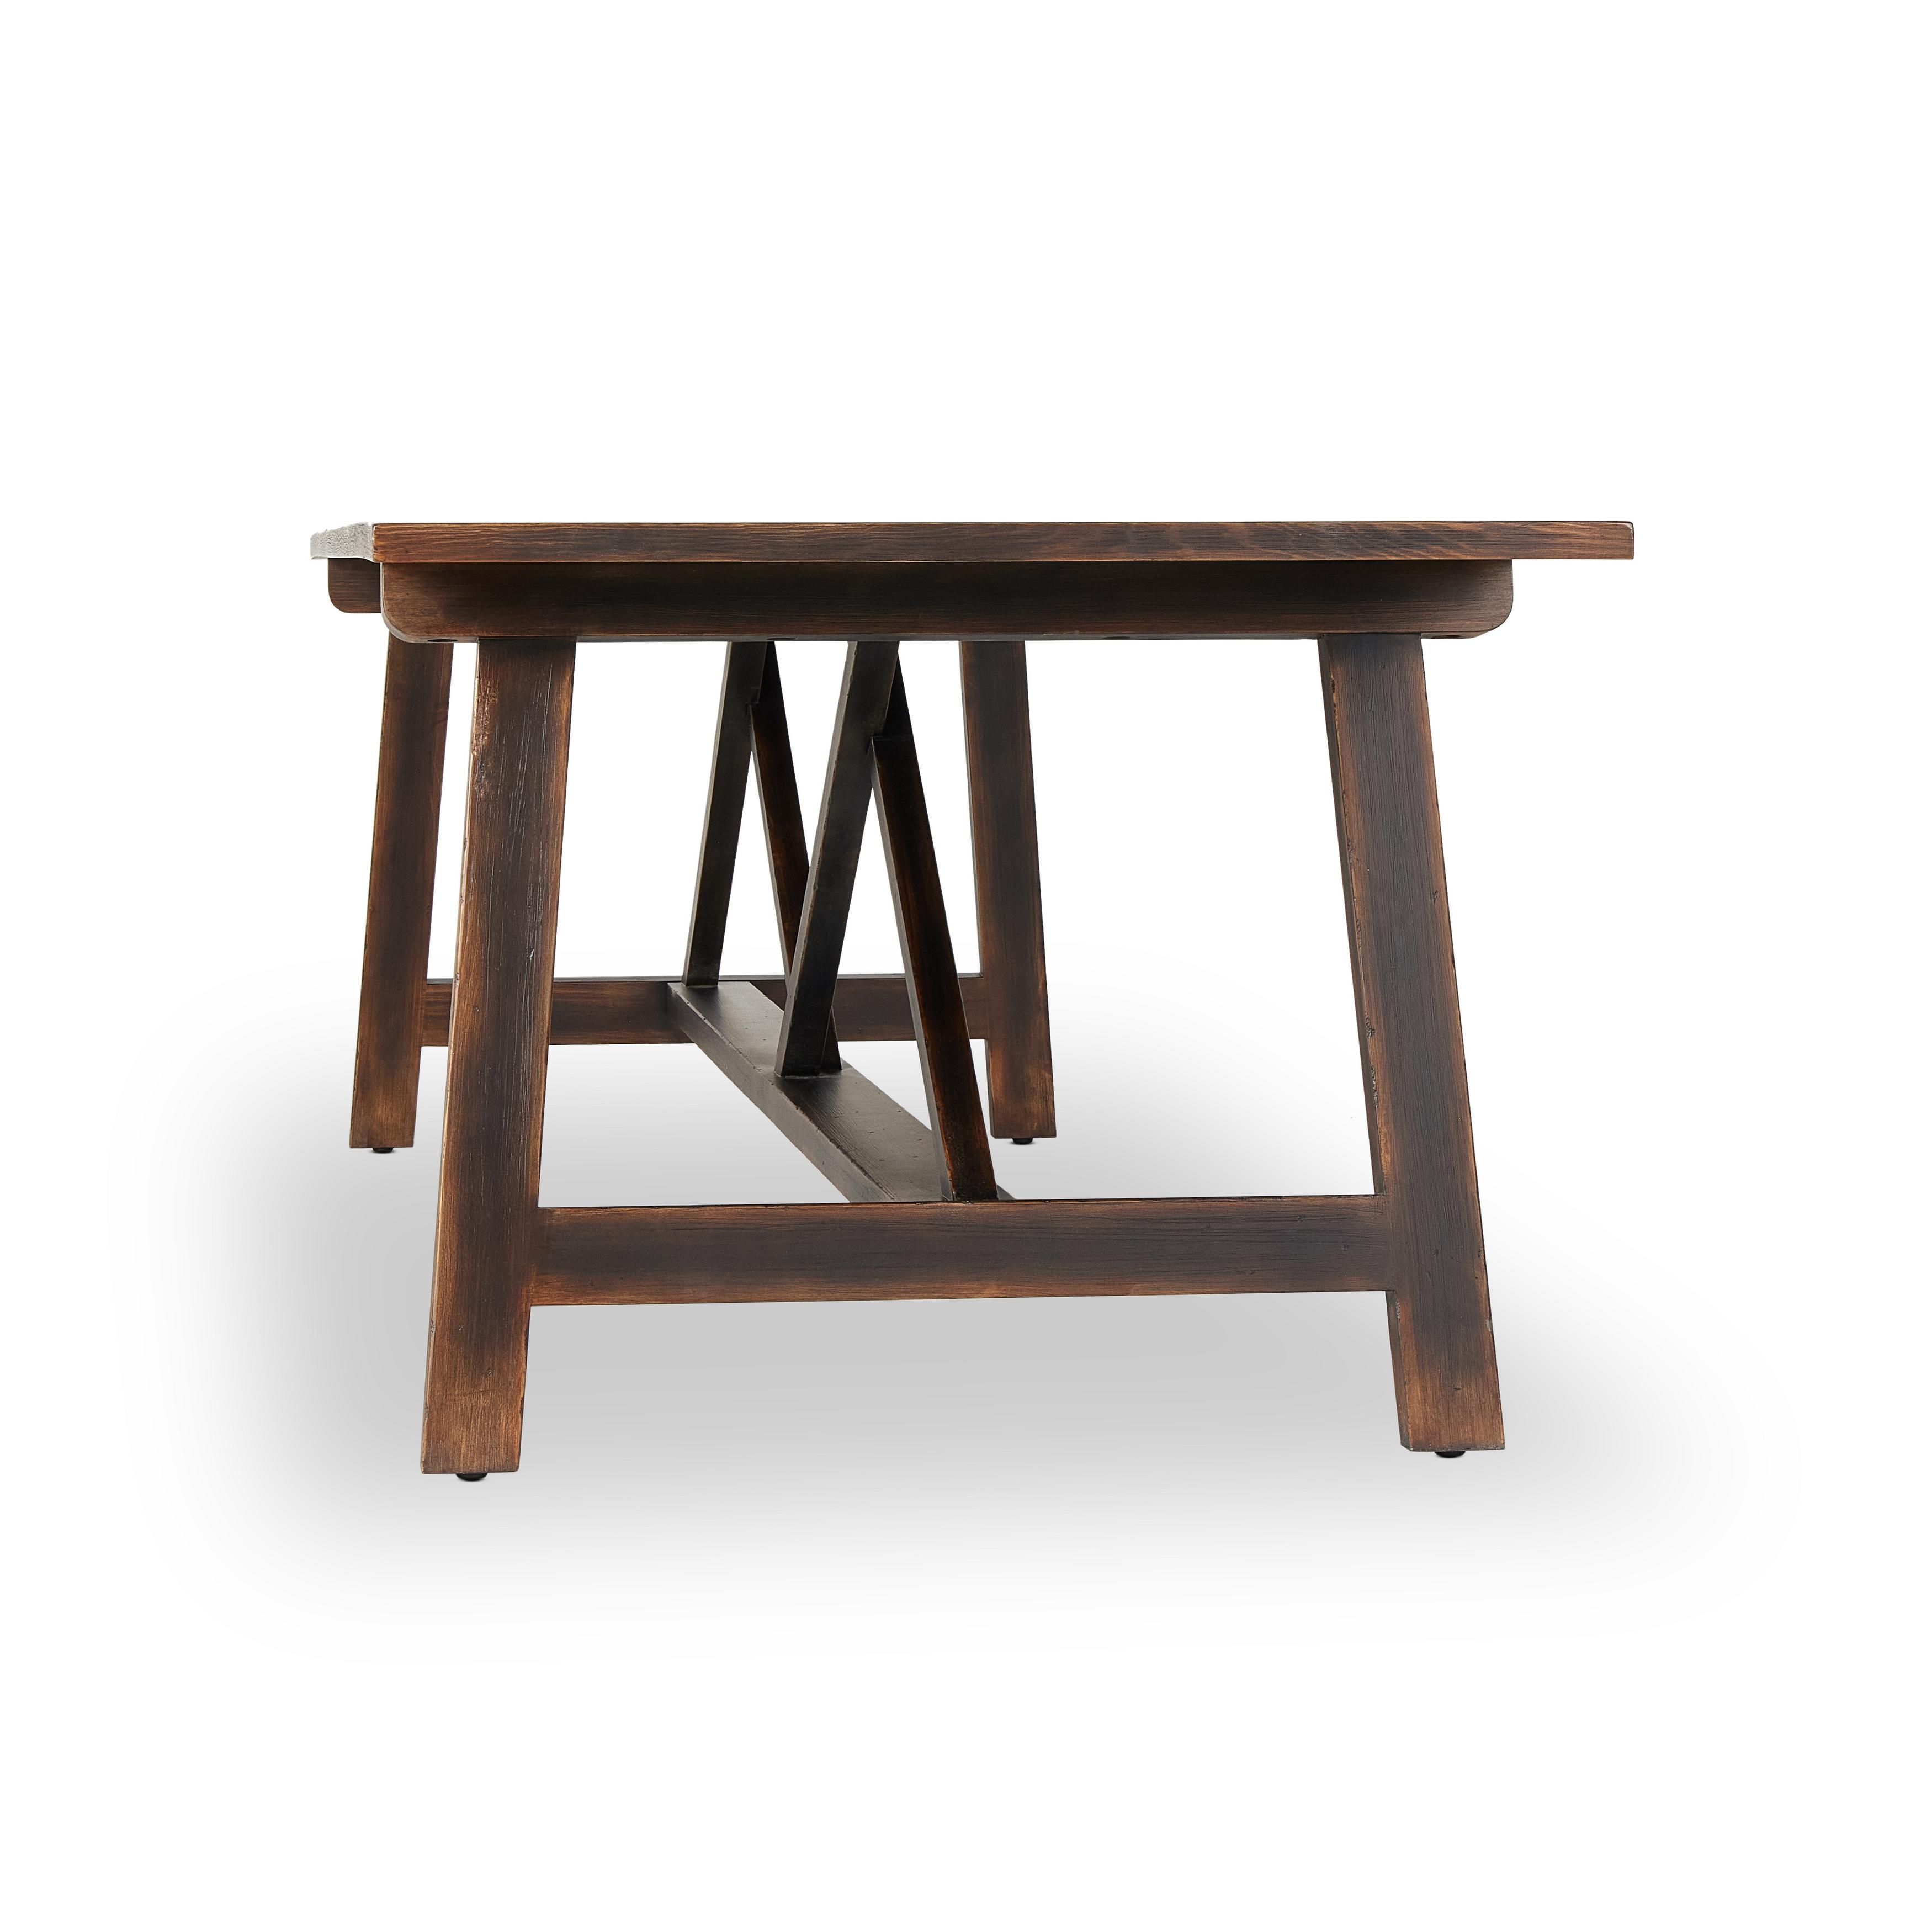 The 1500 Kilometer Dining Table-Agd Brwn - Image 9